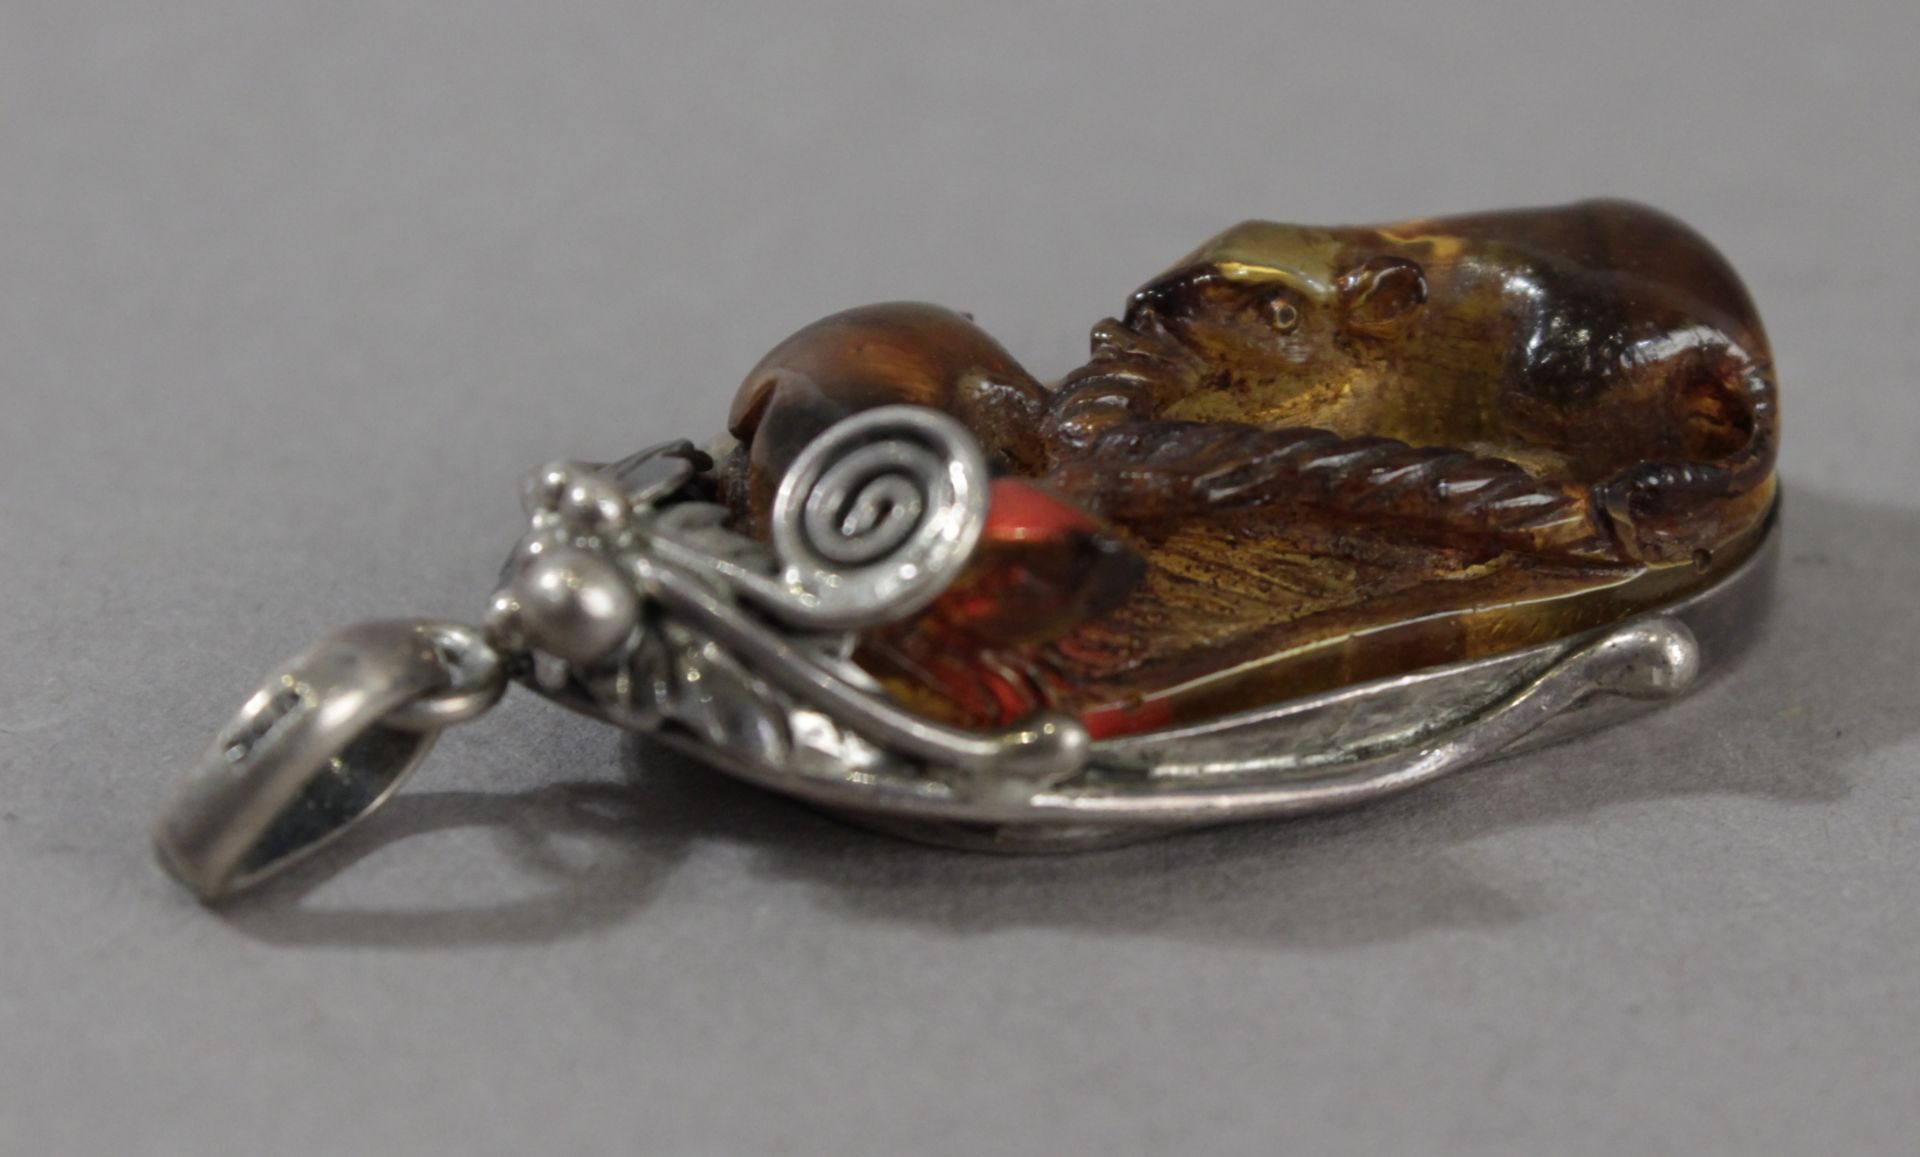 A19th century Japanese amber and silver pendant form Meiji period